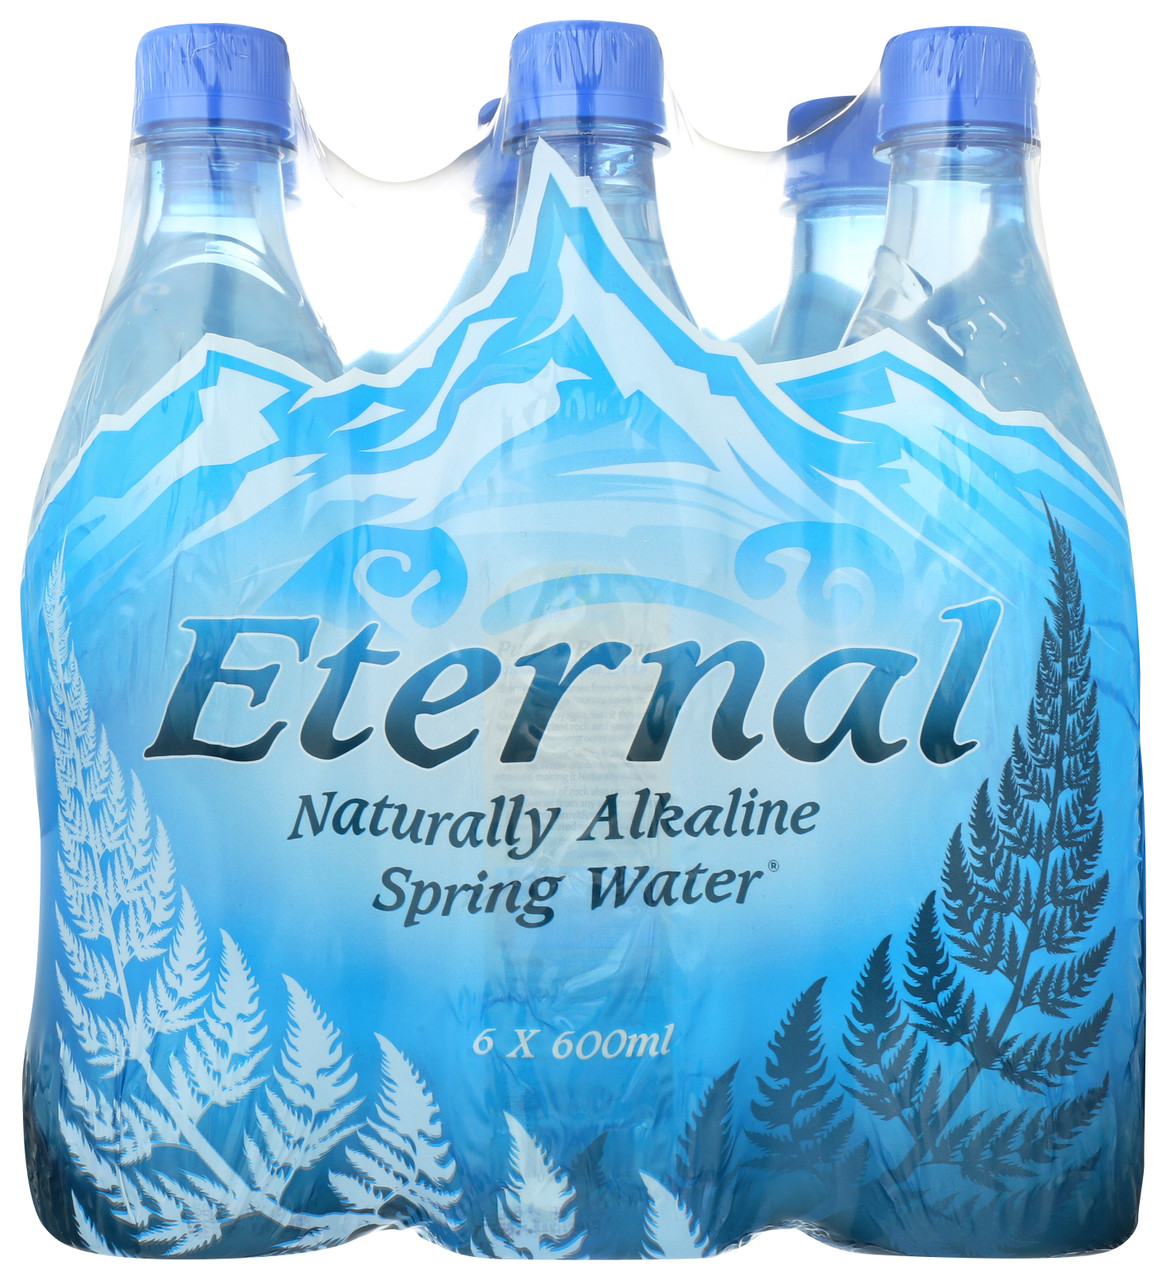 Naturally Alkaline Spring Water®  6 Count